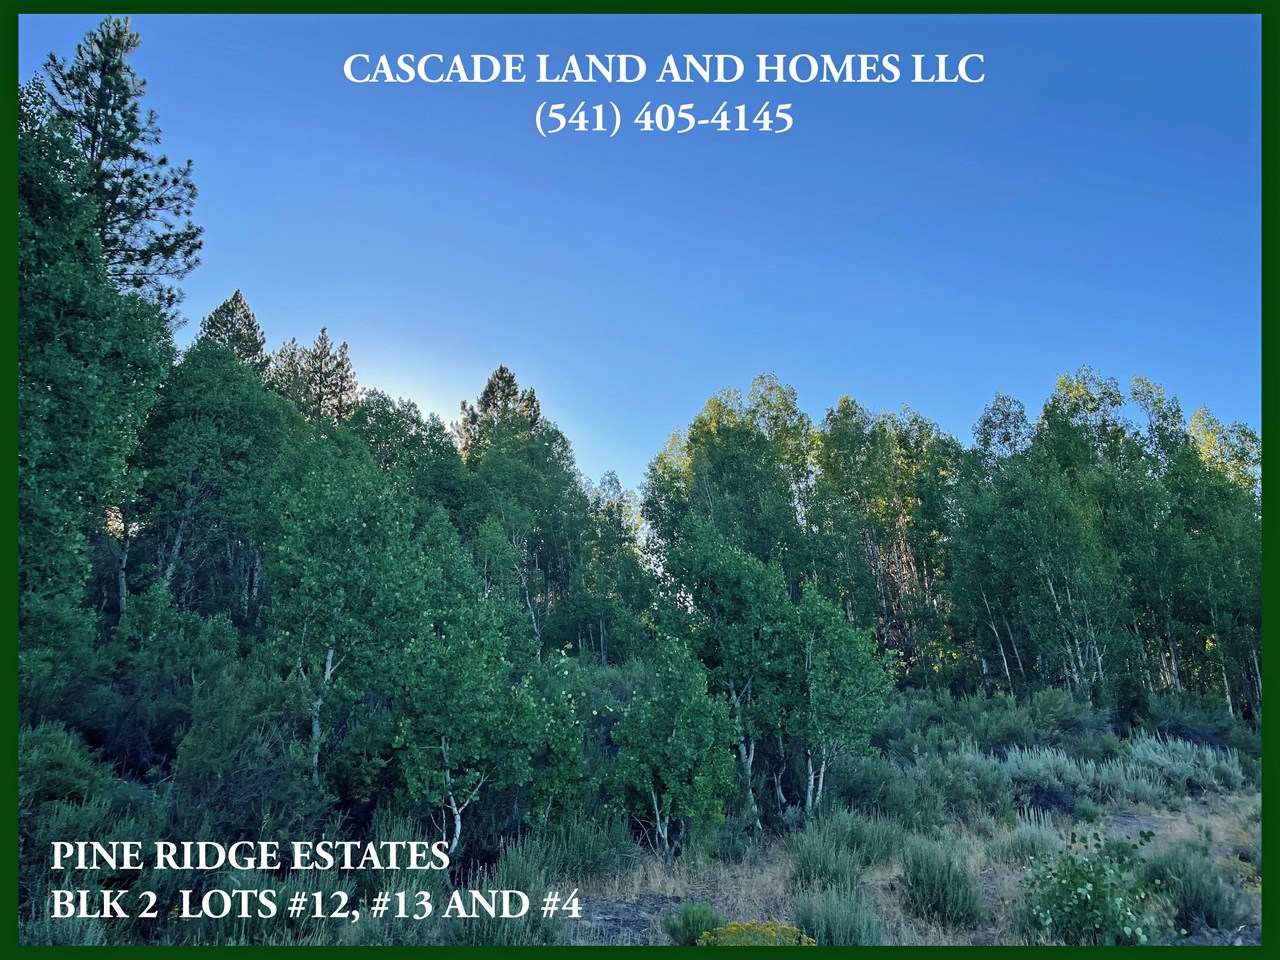 the property has a variety of mature trees, and slopes upward from royal coachman drive to increase the territorial views of the valley and surrounding mountains.